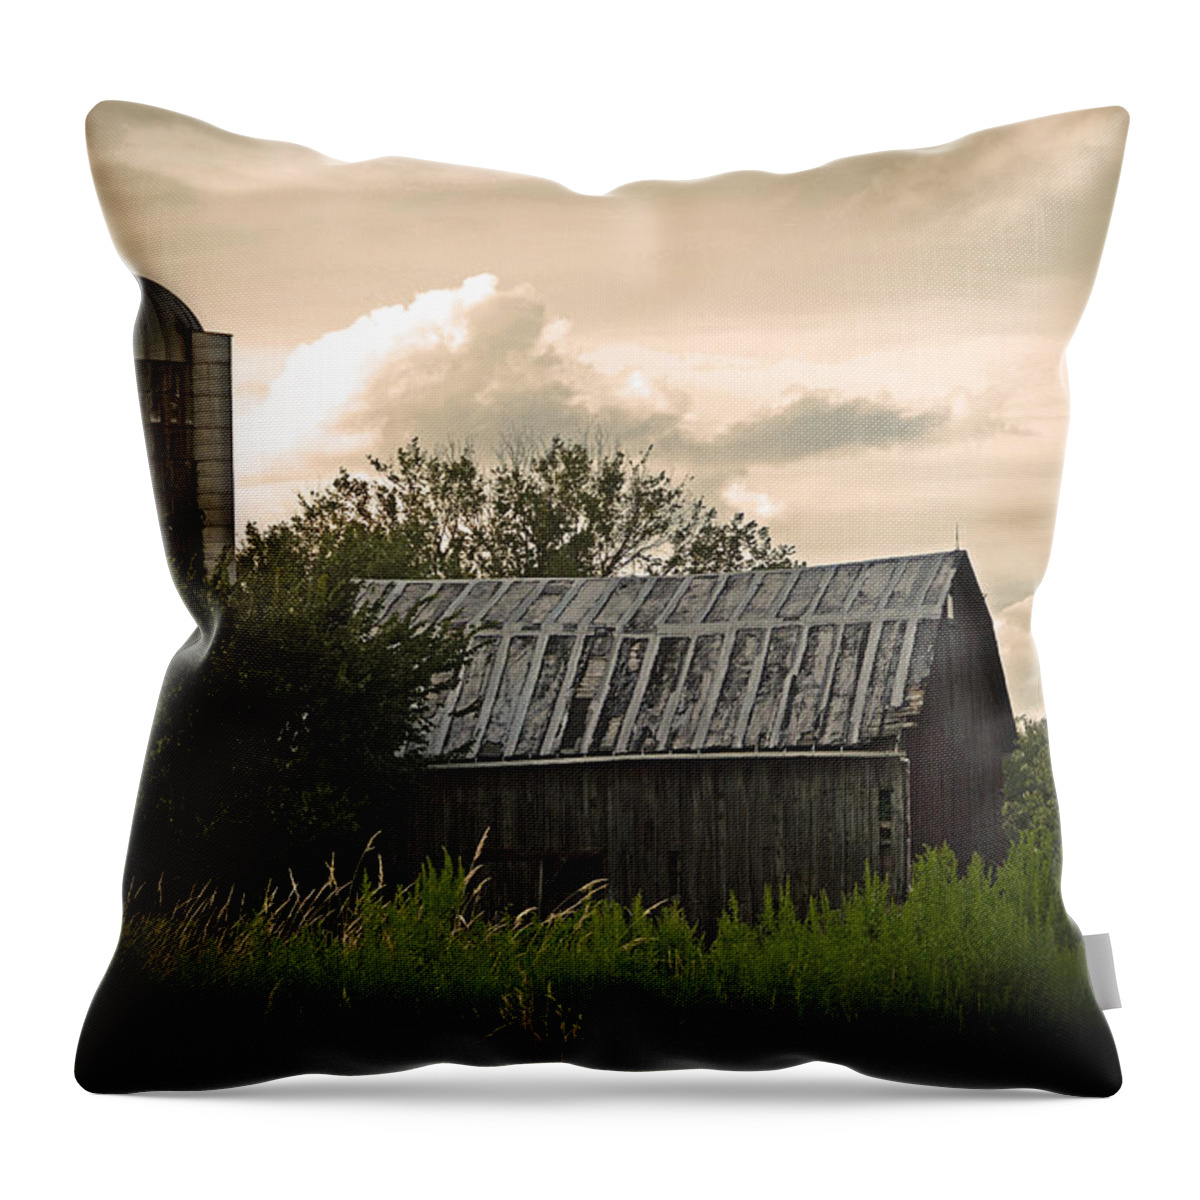 Landscape Throw Pillow featuring the photograph Bygone Times by Lena Wilhite